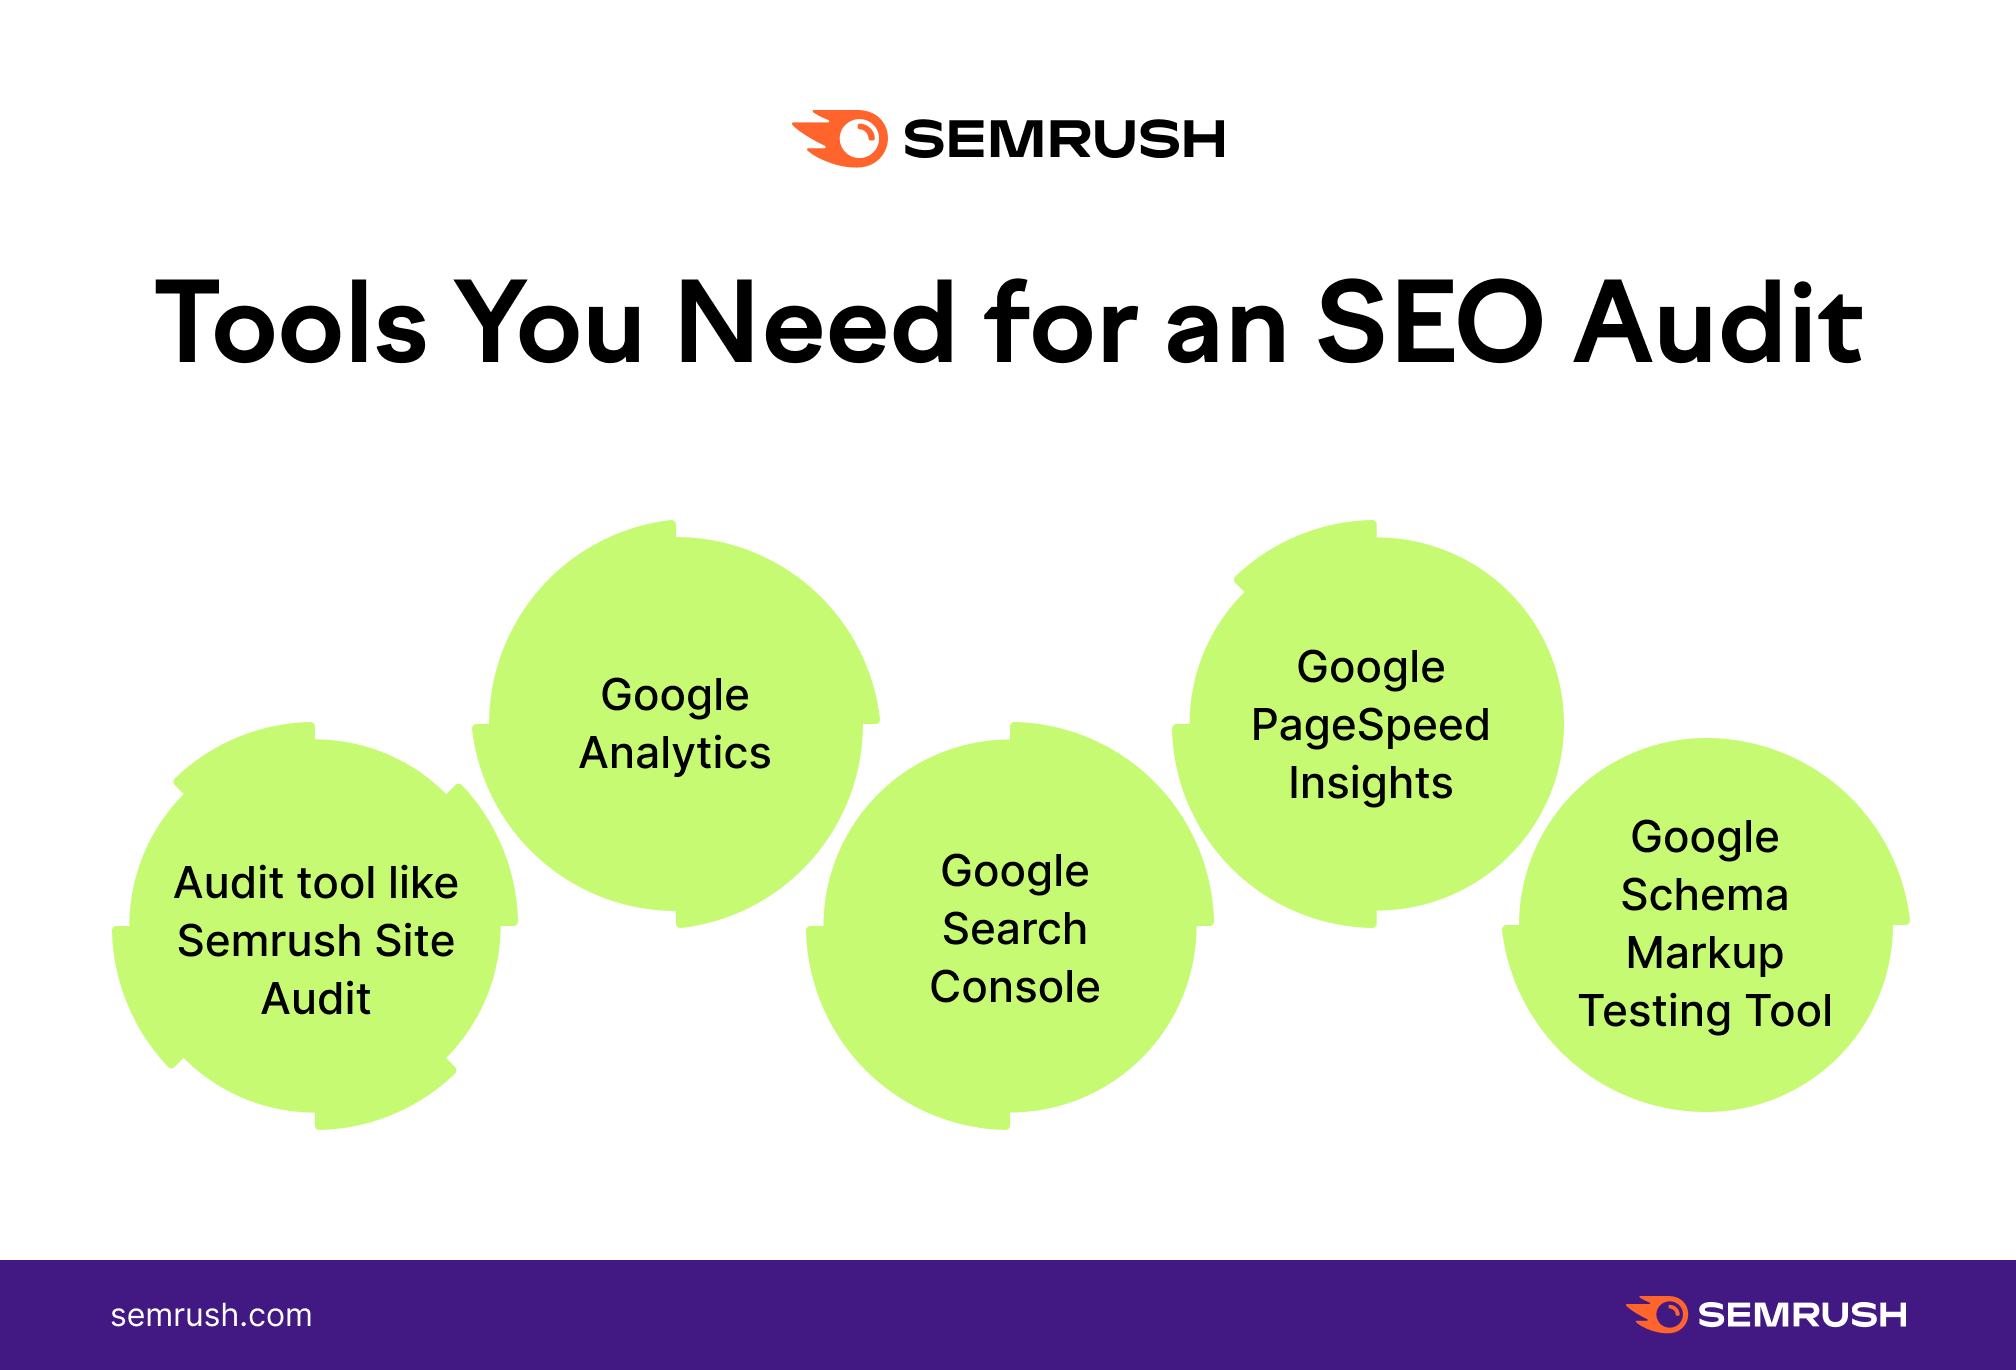 Tools you need for an SEO audit